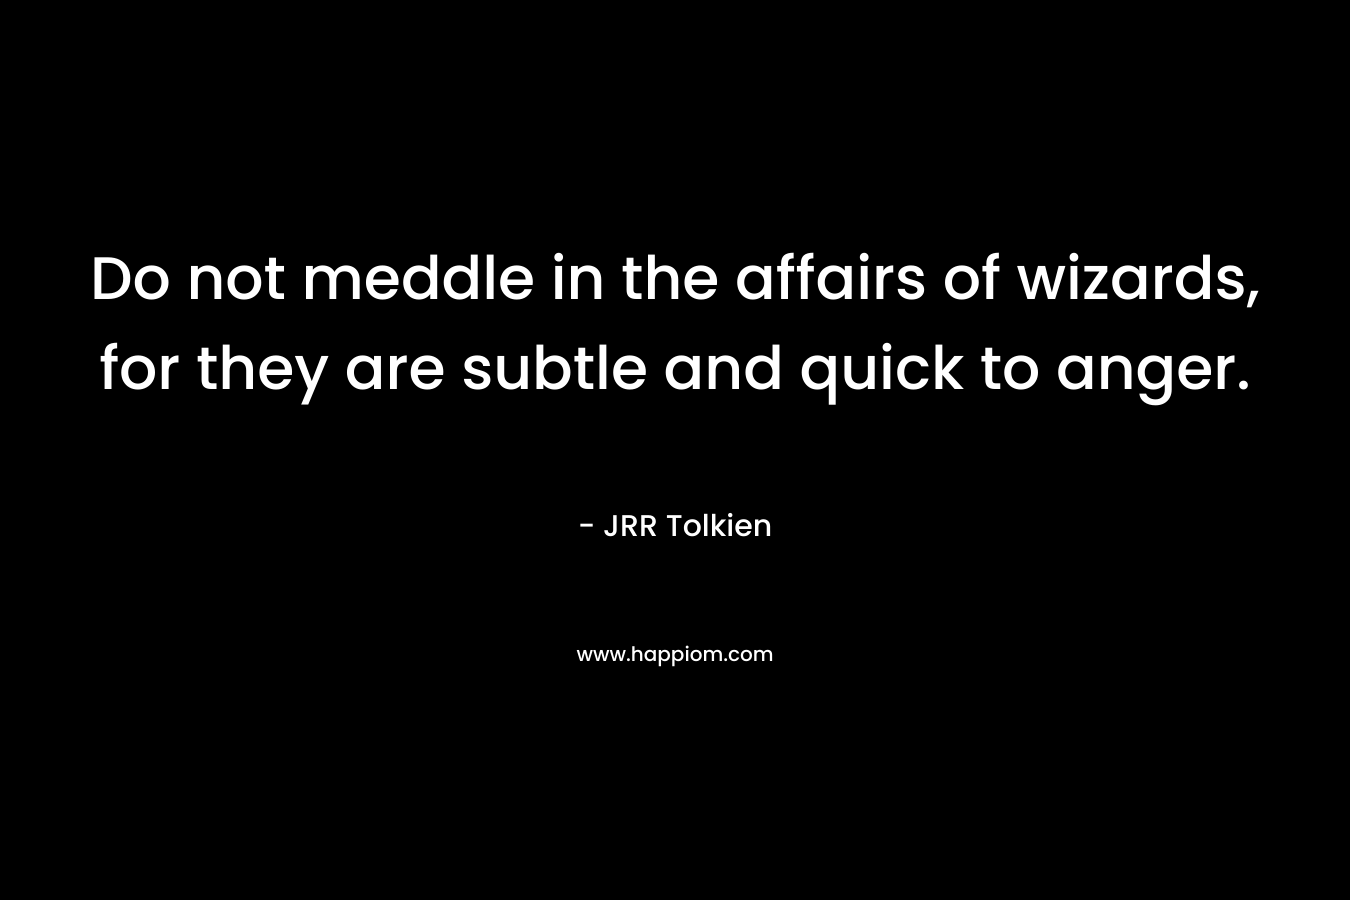 Do not meddle in the affairs of wizards, for they are subtle and quick to anger. – JRR Tolkien